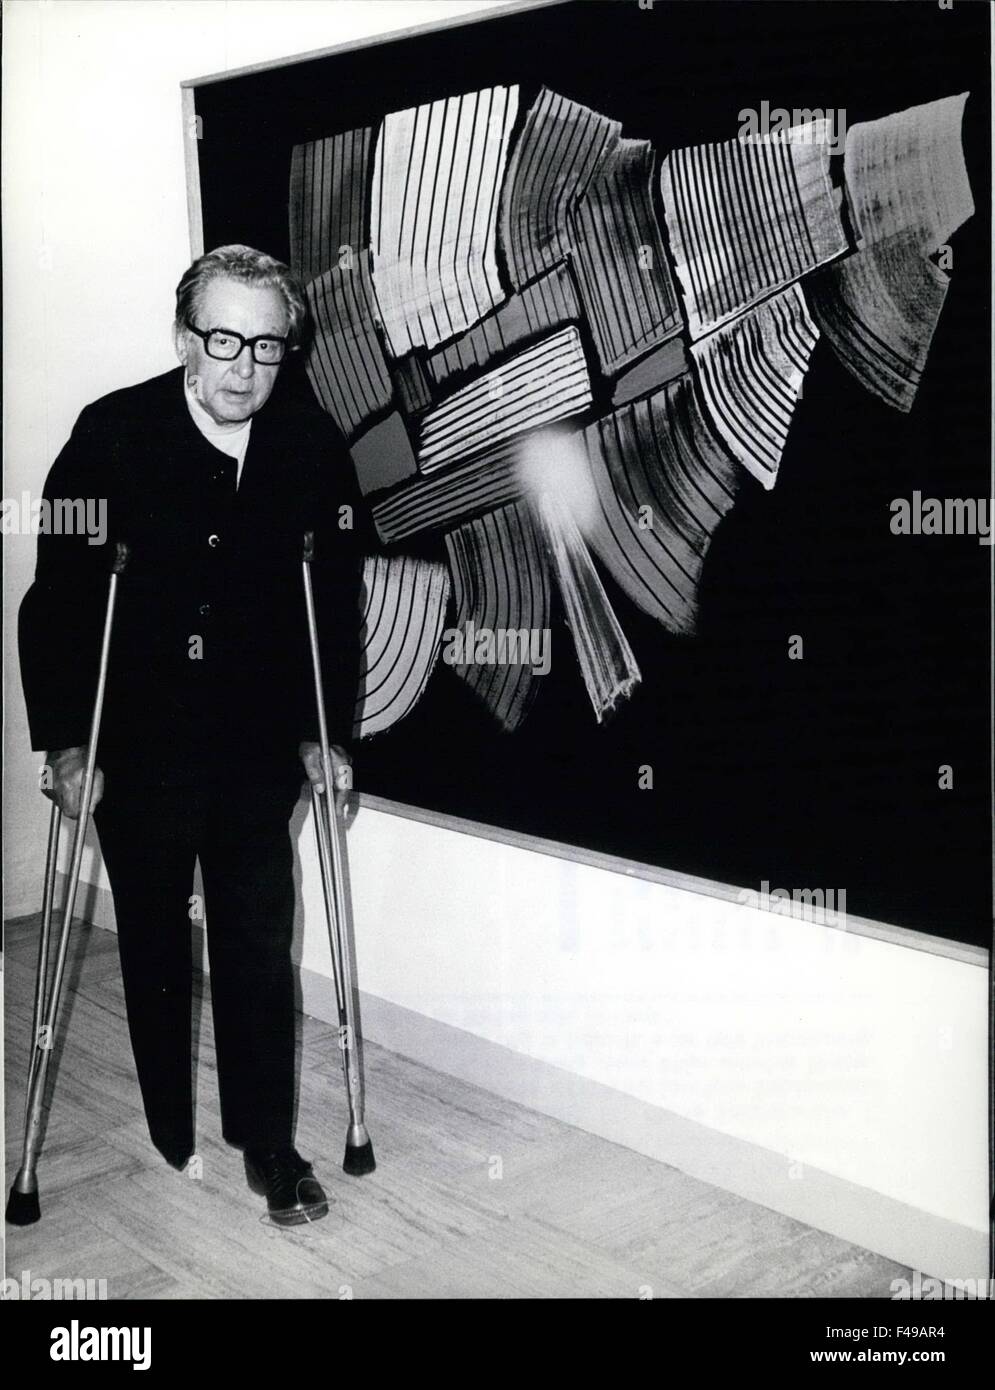 1976 - Exhibition with Works of Hans Hartung at the Munich Lenbachhaus An Exhibition with works of Hans Hartung, the Famous German painter, was opened recently at the Lenbachhaus in Munich. the painter himself attended the opening. Paintings from over 50 years can be seen, from the beginning in 1922 up to his monumental works of 1973. Our picture: Hans Hartung (70) who lives in France since 1945 in front of his ''Colour Scale no. 5'' from 1971. © Keystone Pictures USA/ZUMAPRESS.com/Alamy Live News Stock Photo